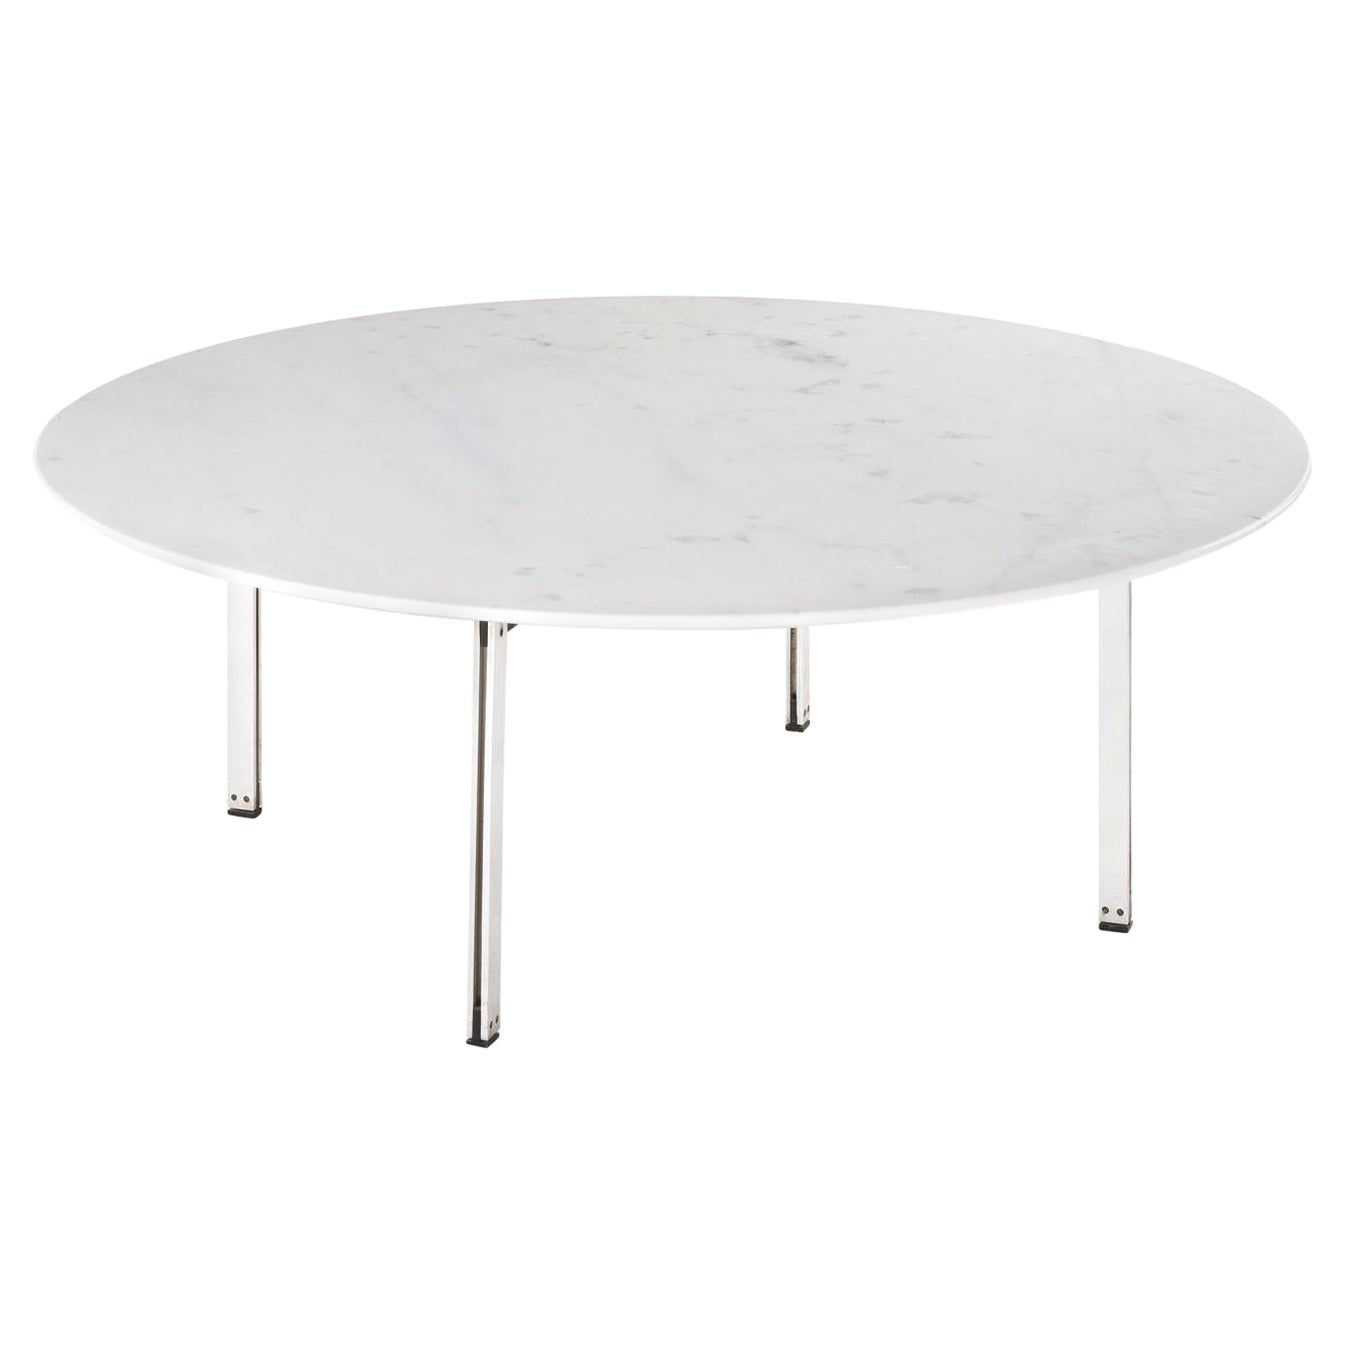 Florence Knoll Round Low Table in White Marble and Metal by Knoll 1950s Italy